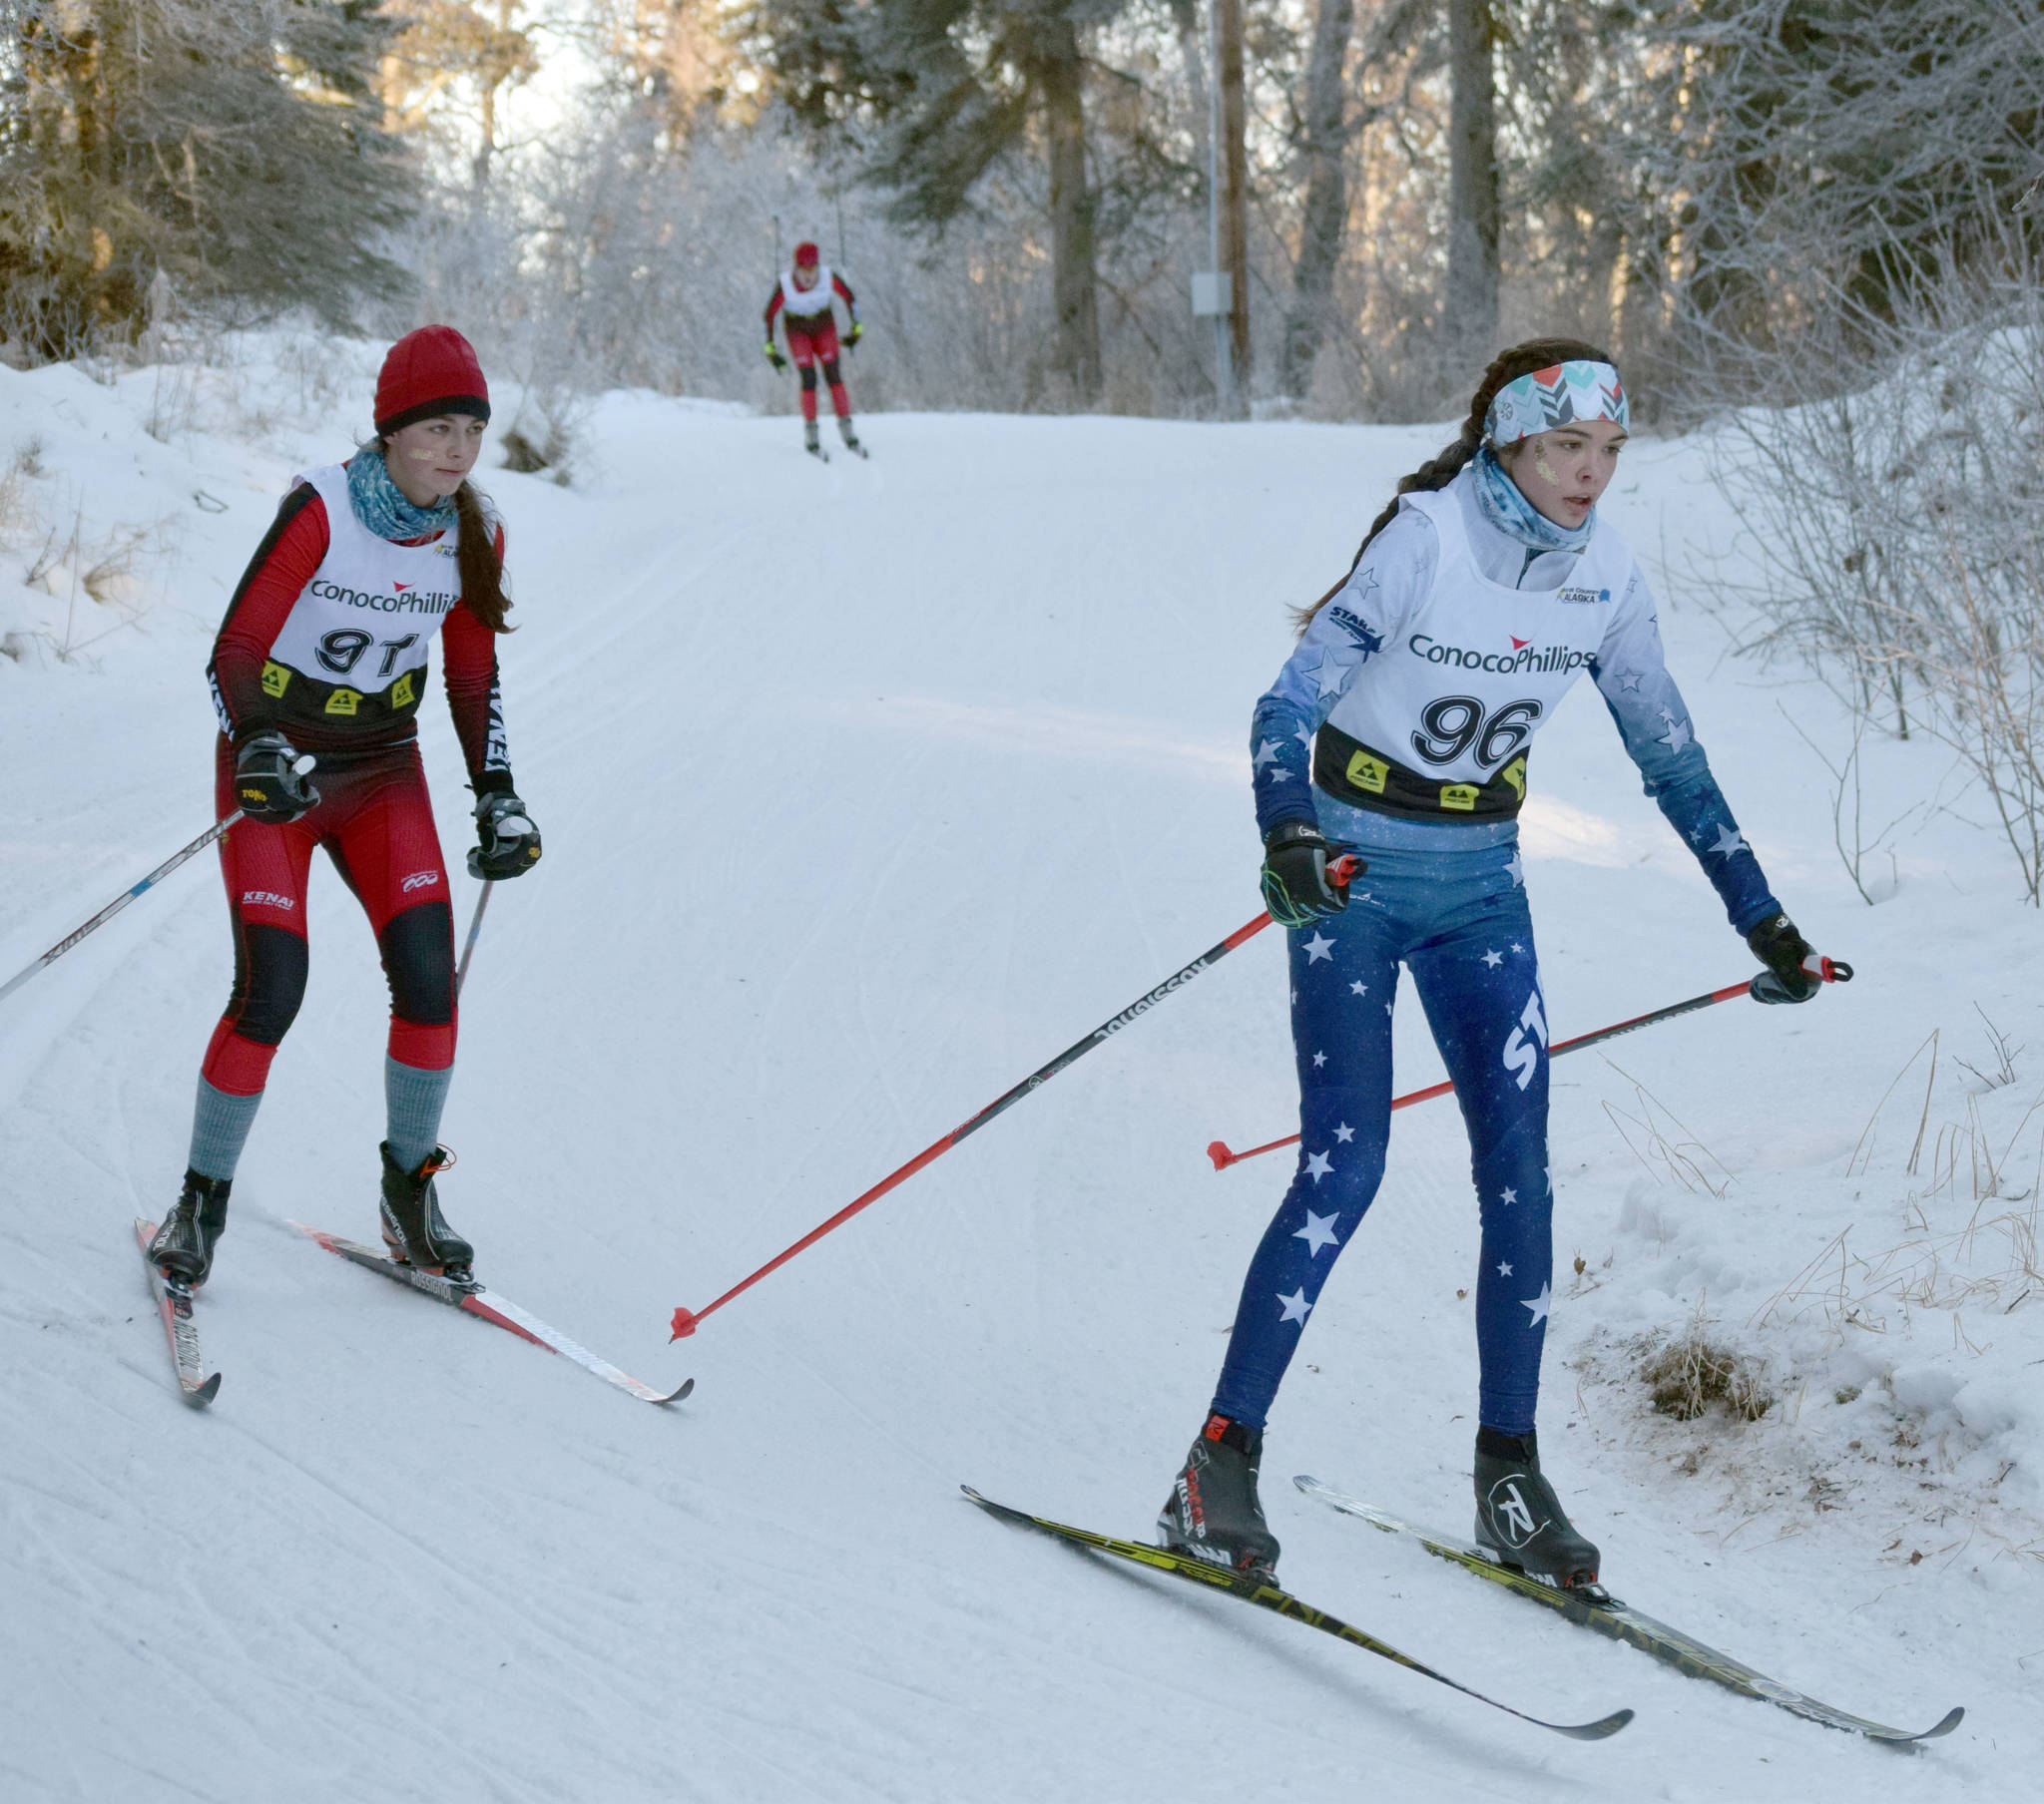 Kenai Central’s Summer Foster and Soldotna’s Erika Arthur round a corner during Besh Cup 3 at Tsalteshi Trails on Sunday, Jan. 20, 2019. (Photo by Jeff Helminiak/Peninsula Clarion)